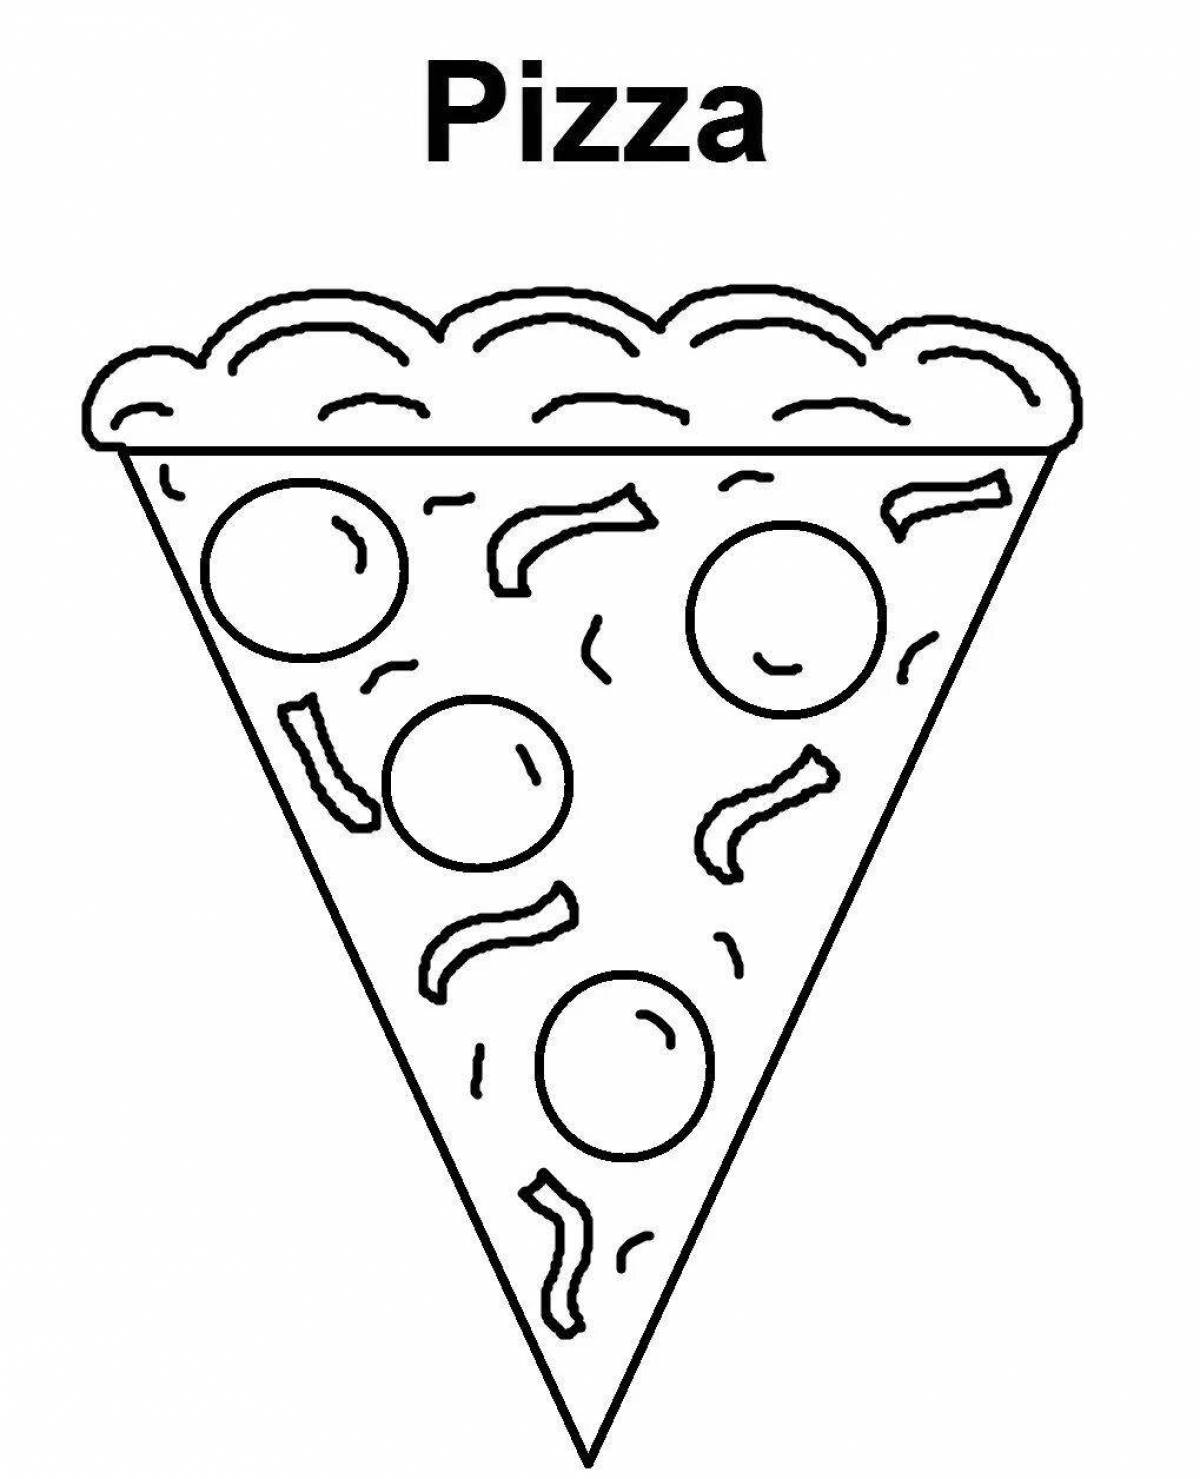 Teasing pizza slice coloring book